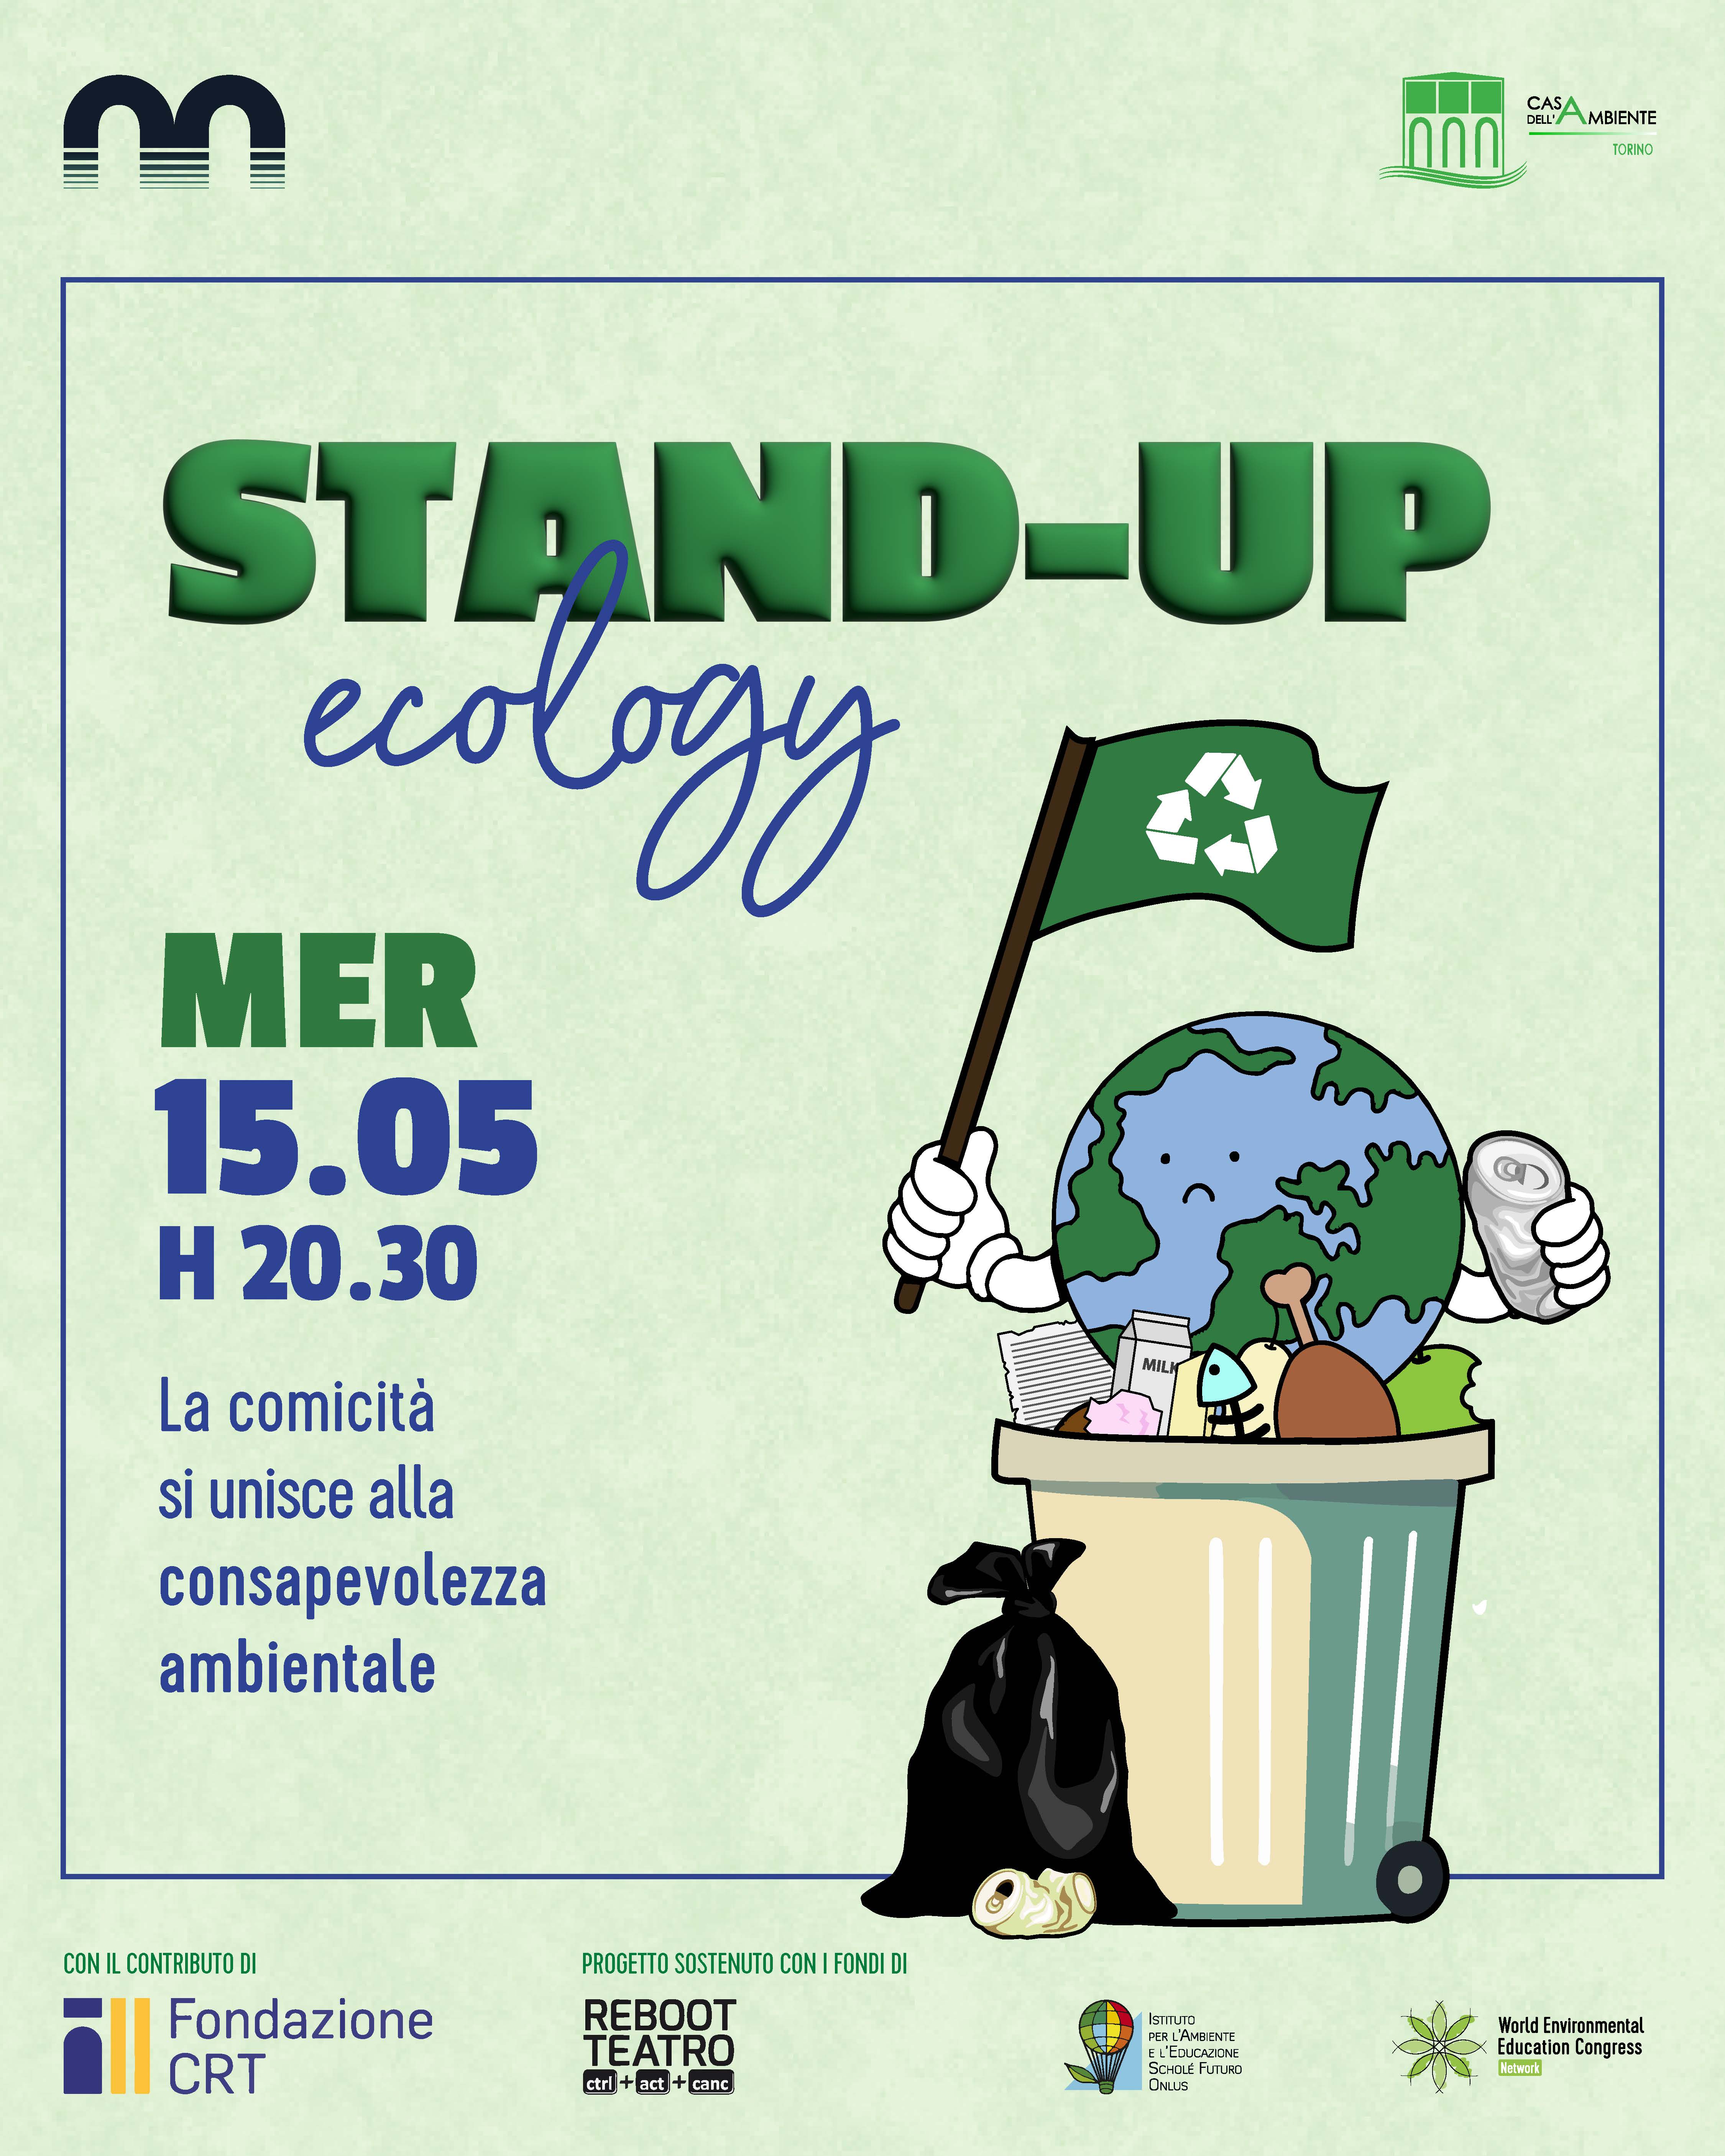 STAND-UP ECOLOGY